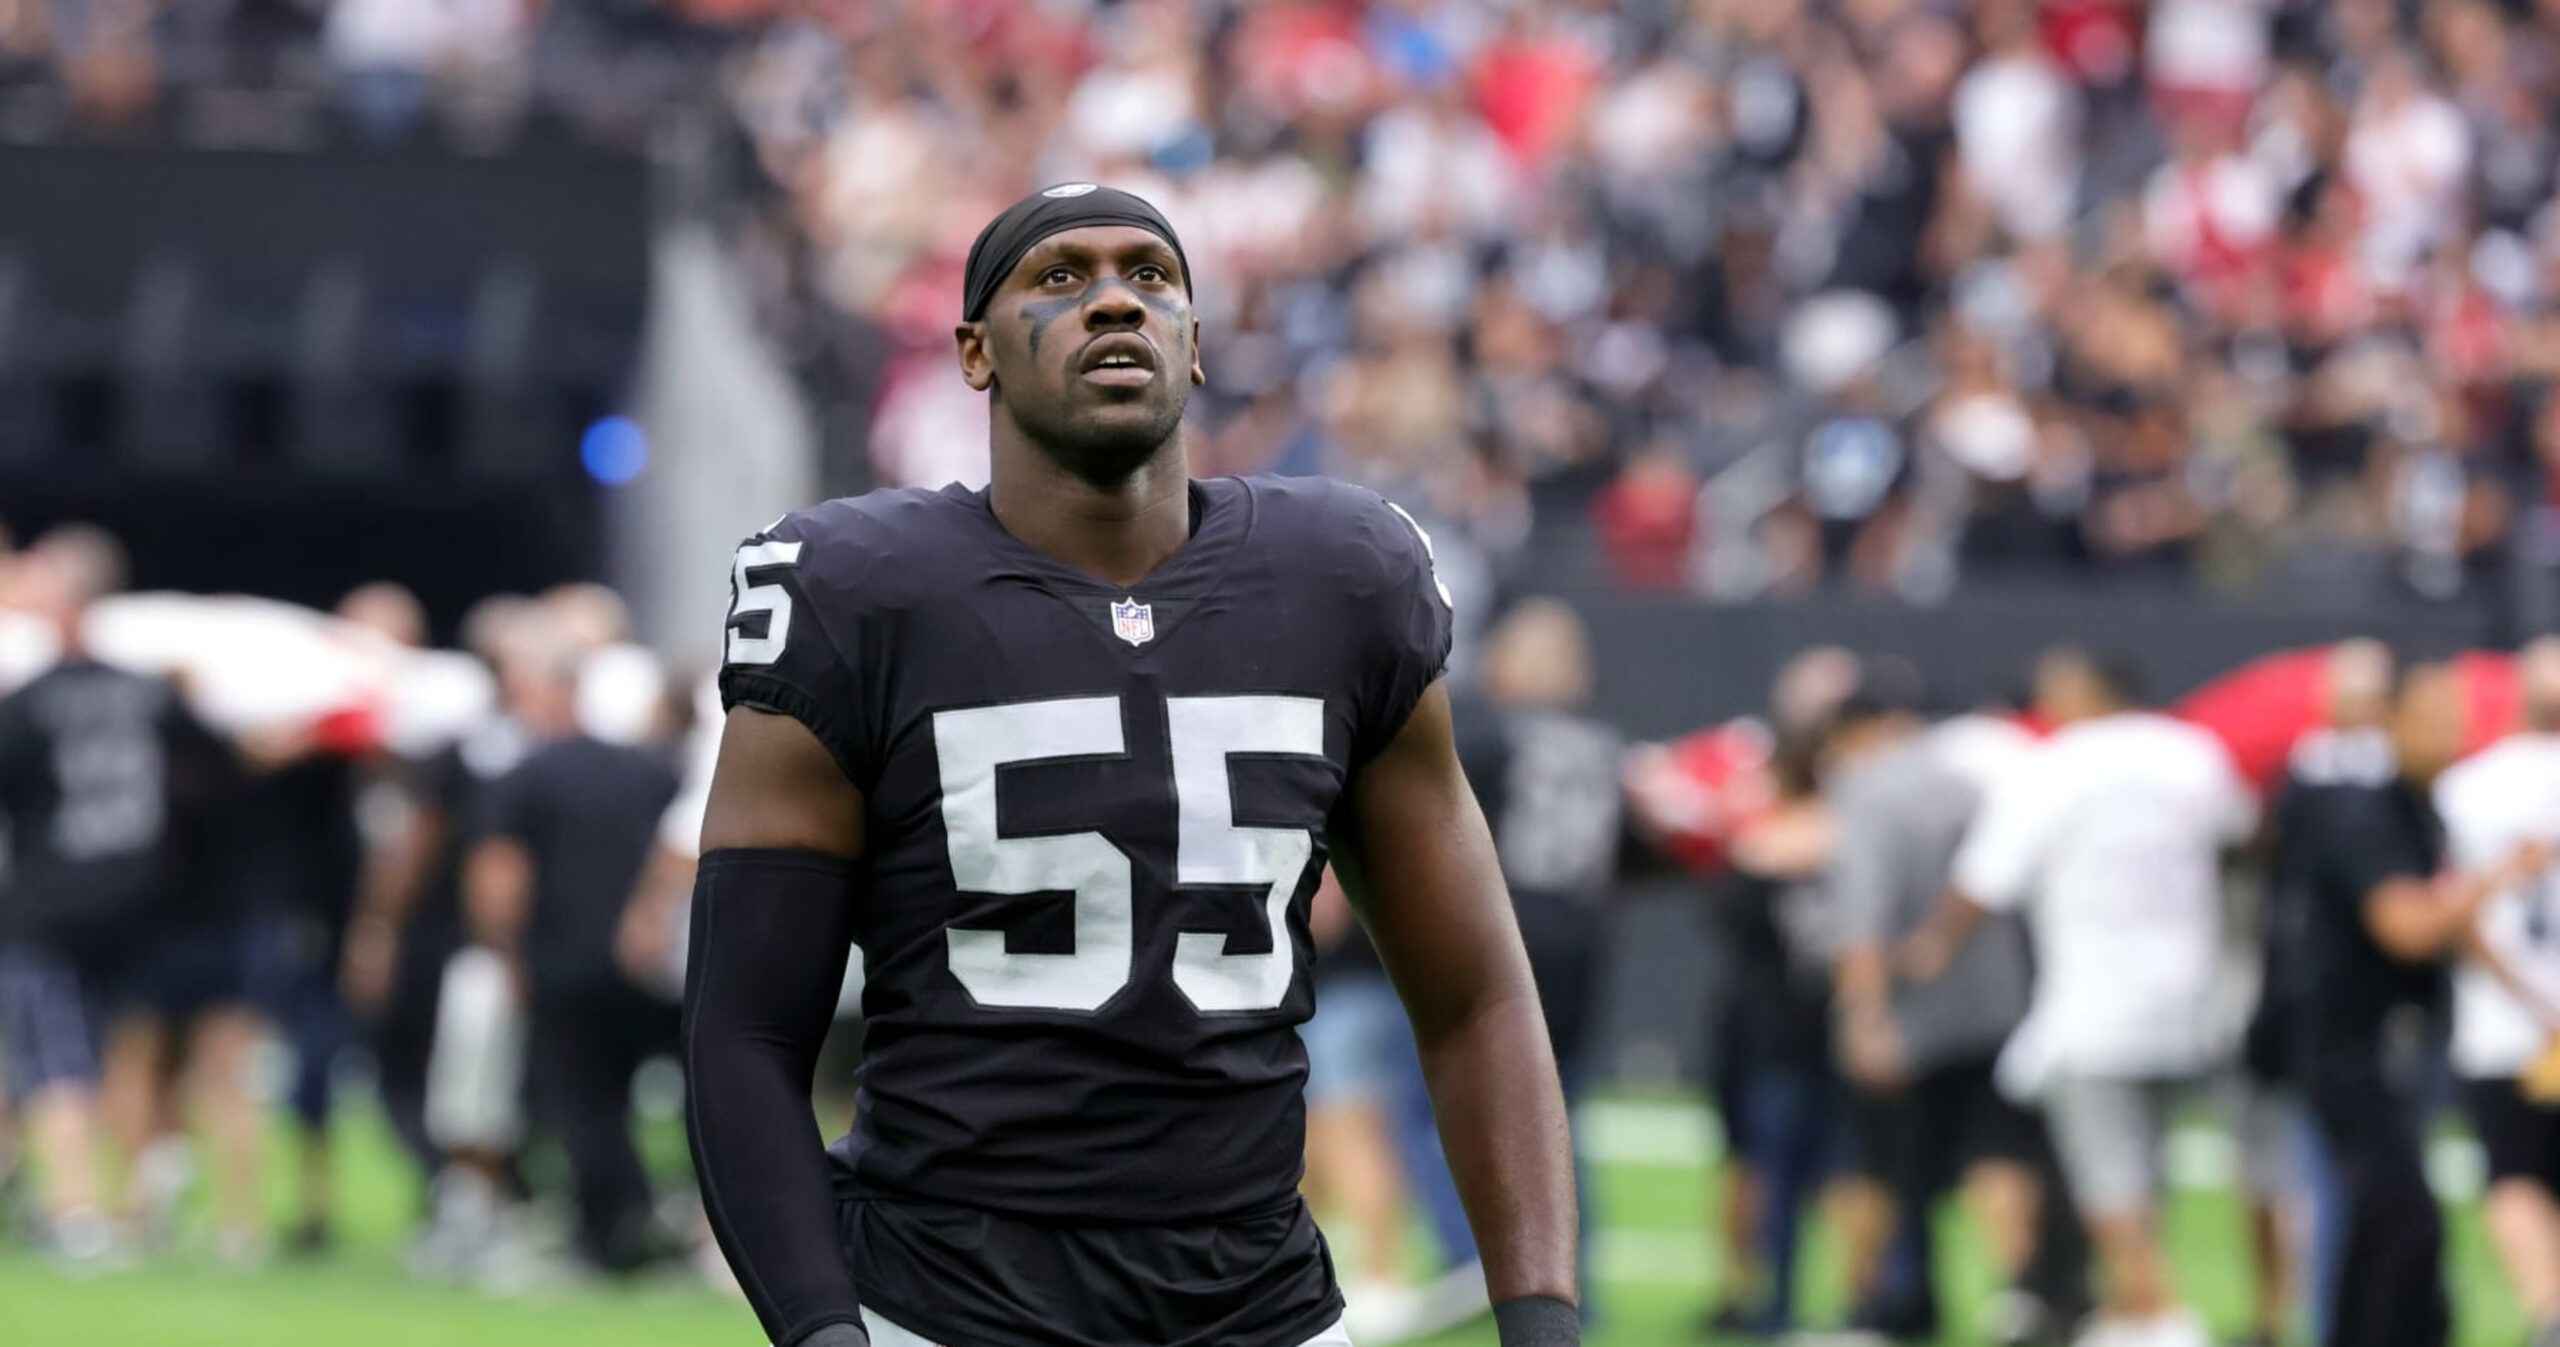 Raiders’ Chandler Jones Is Listed as Having a Non-football Ailment Due to a Personal Issues and Strange Social Media Posts